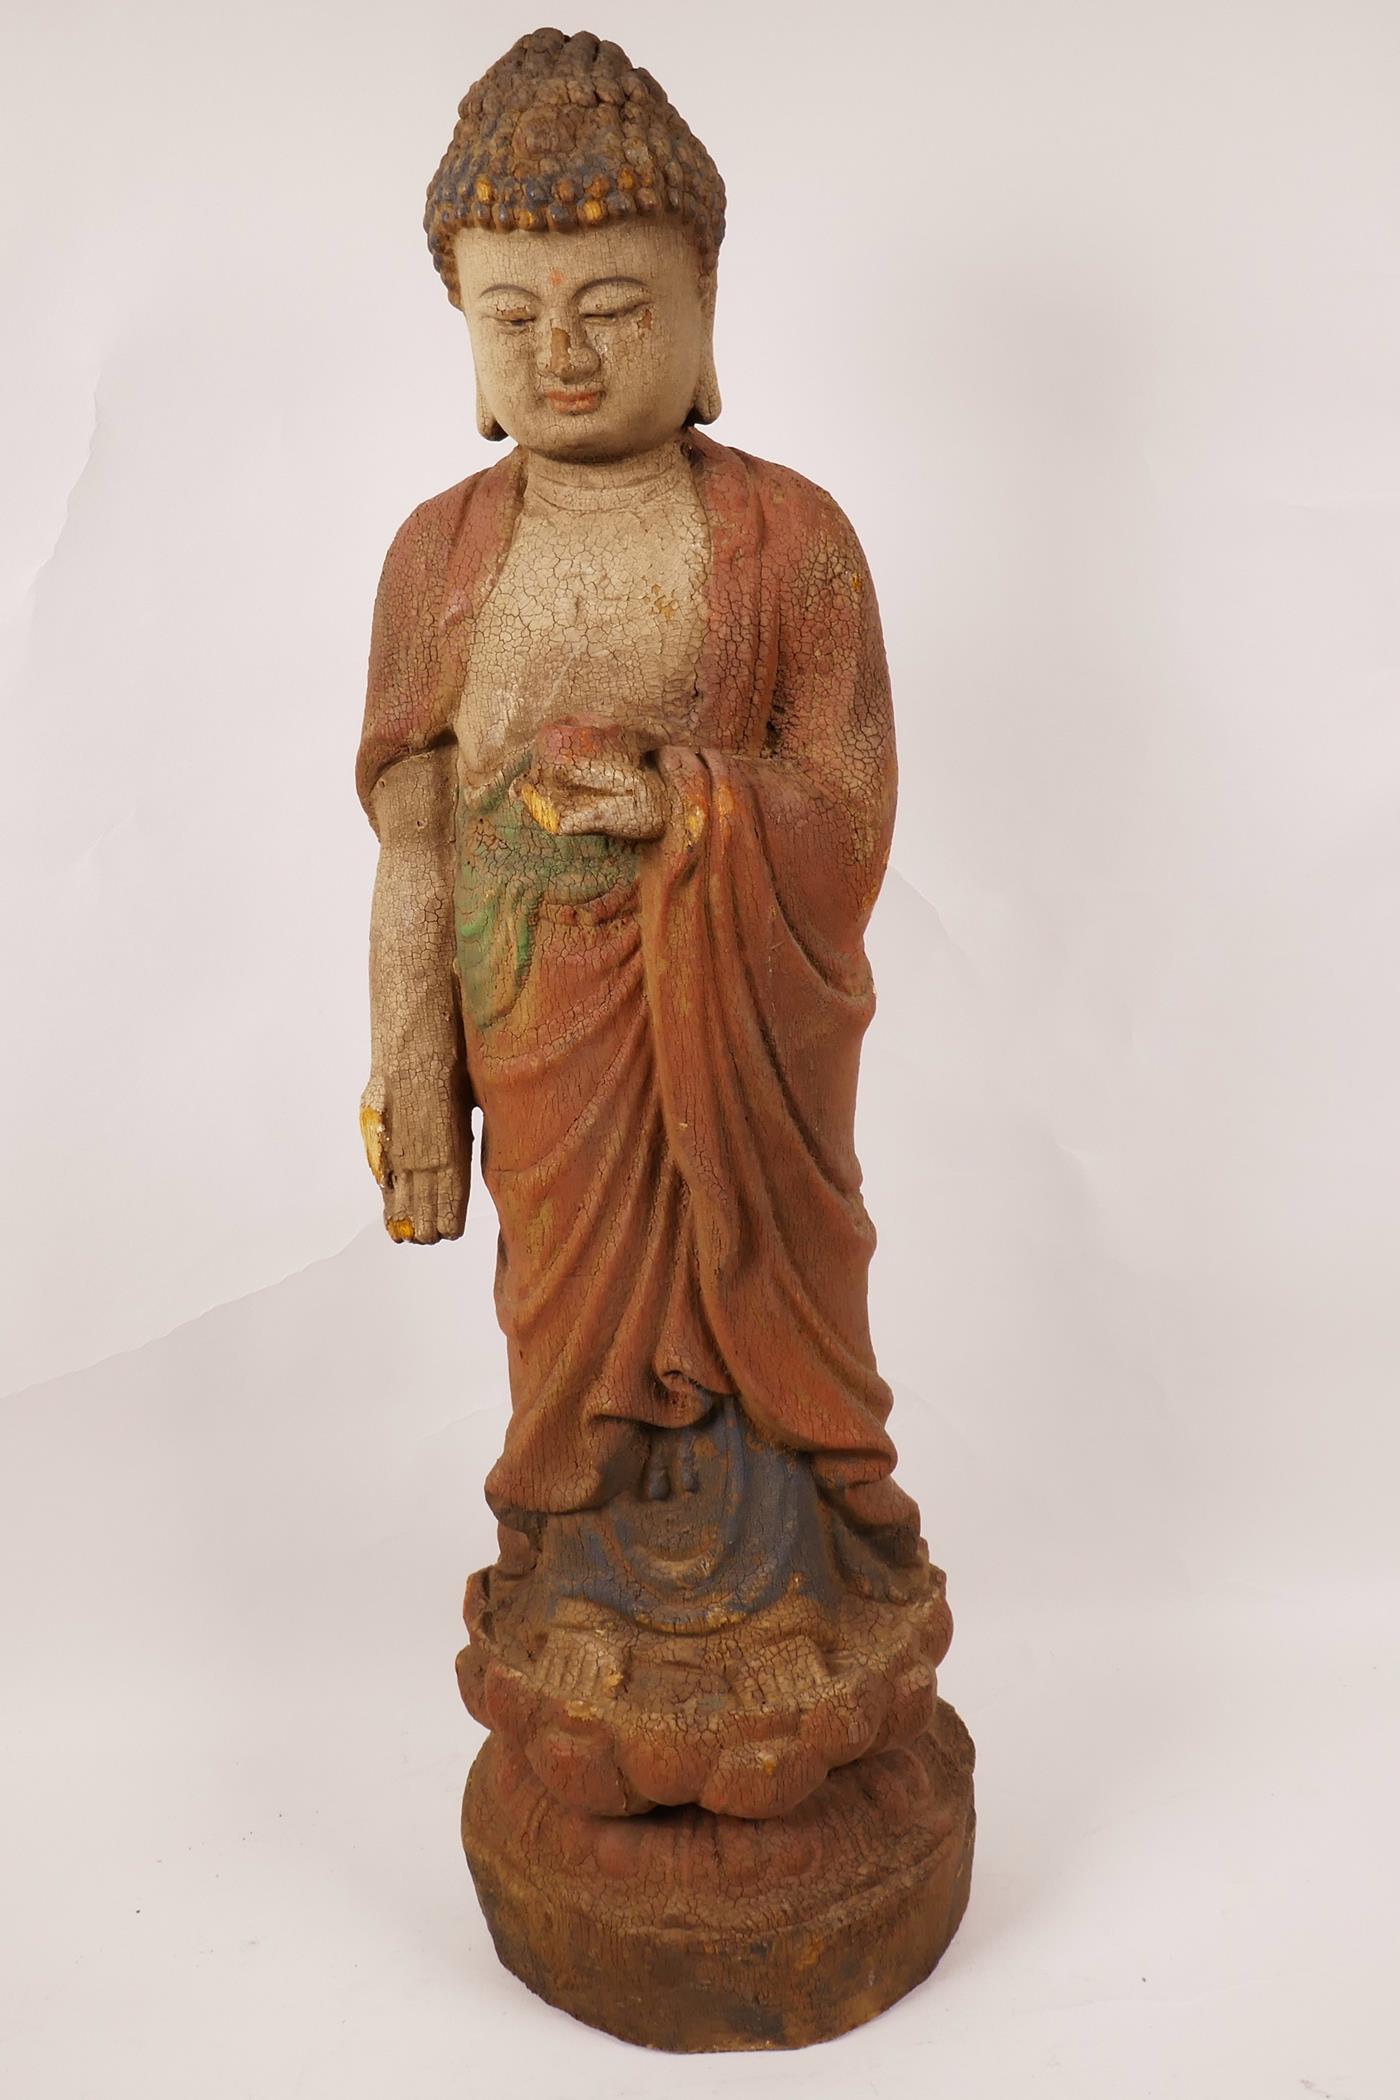 A painted wood figurine of Buddha standing on a lotus flower, 23" high